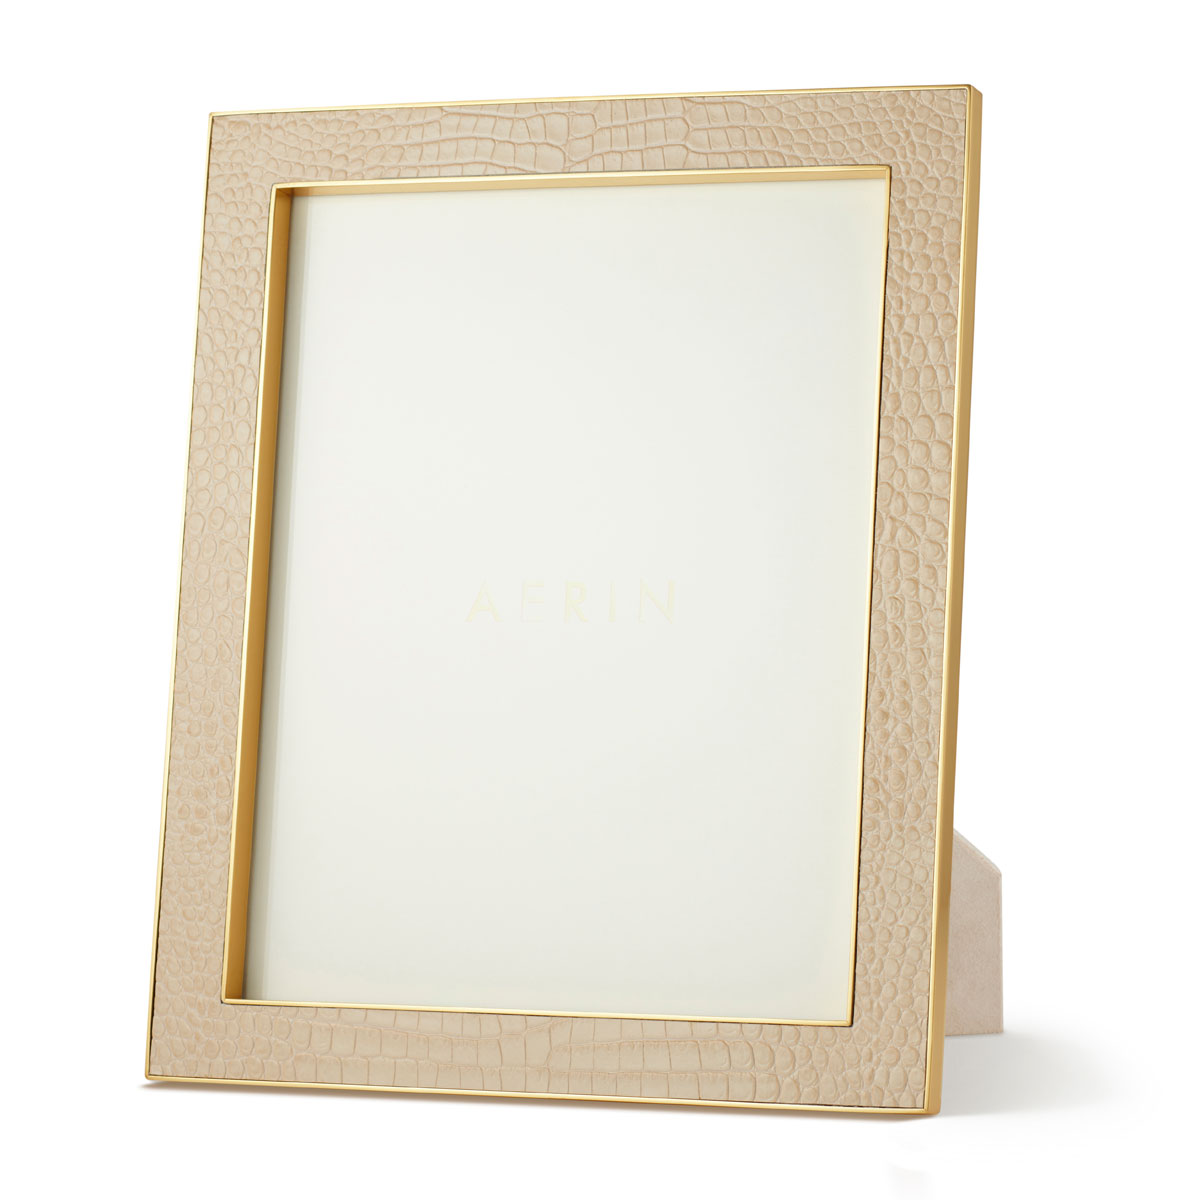 Aerin Classic Croc Leather Picture Frame, Fawn 8x10"